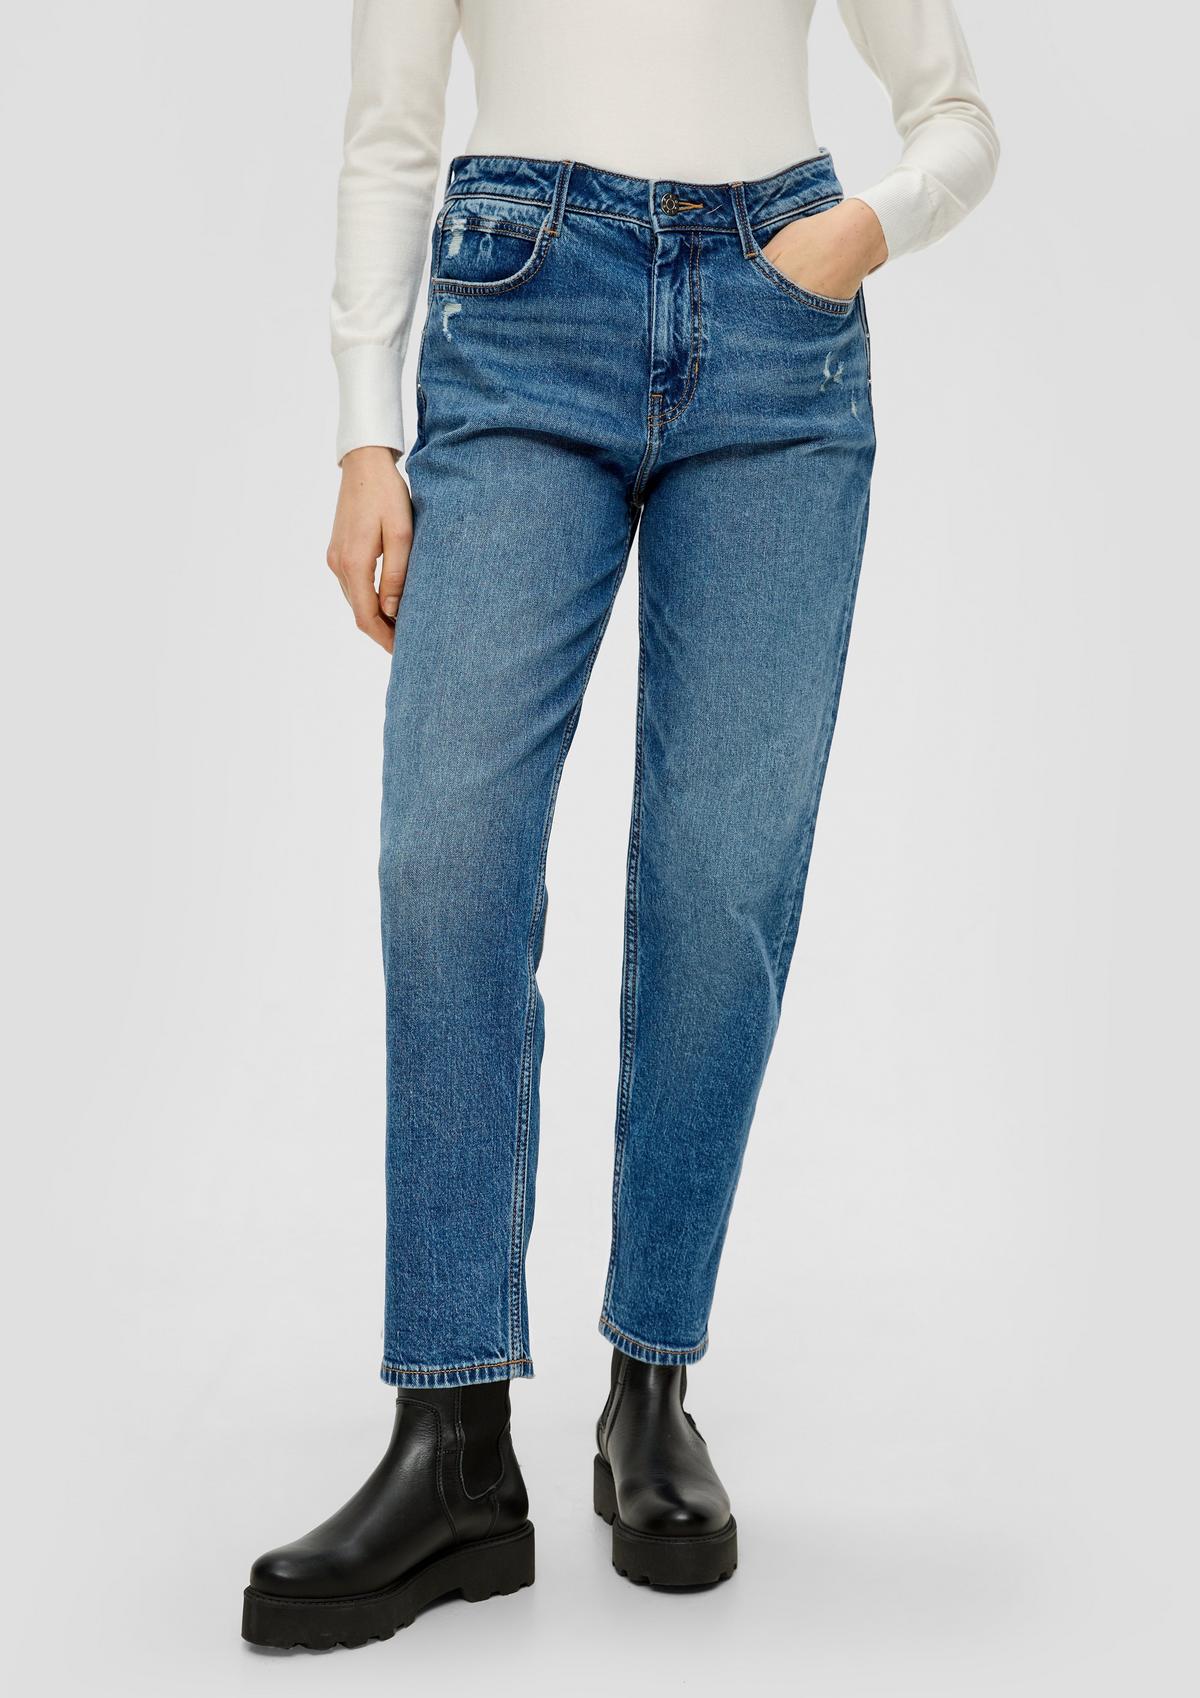 Ankle-Length Jeans / Regular Fit / High Rise / Tapered Leg - blue